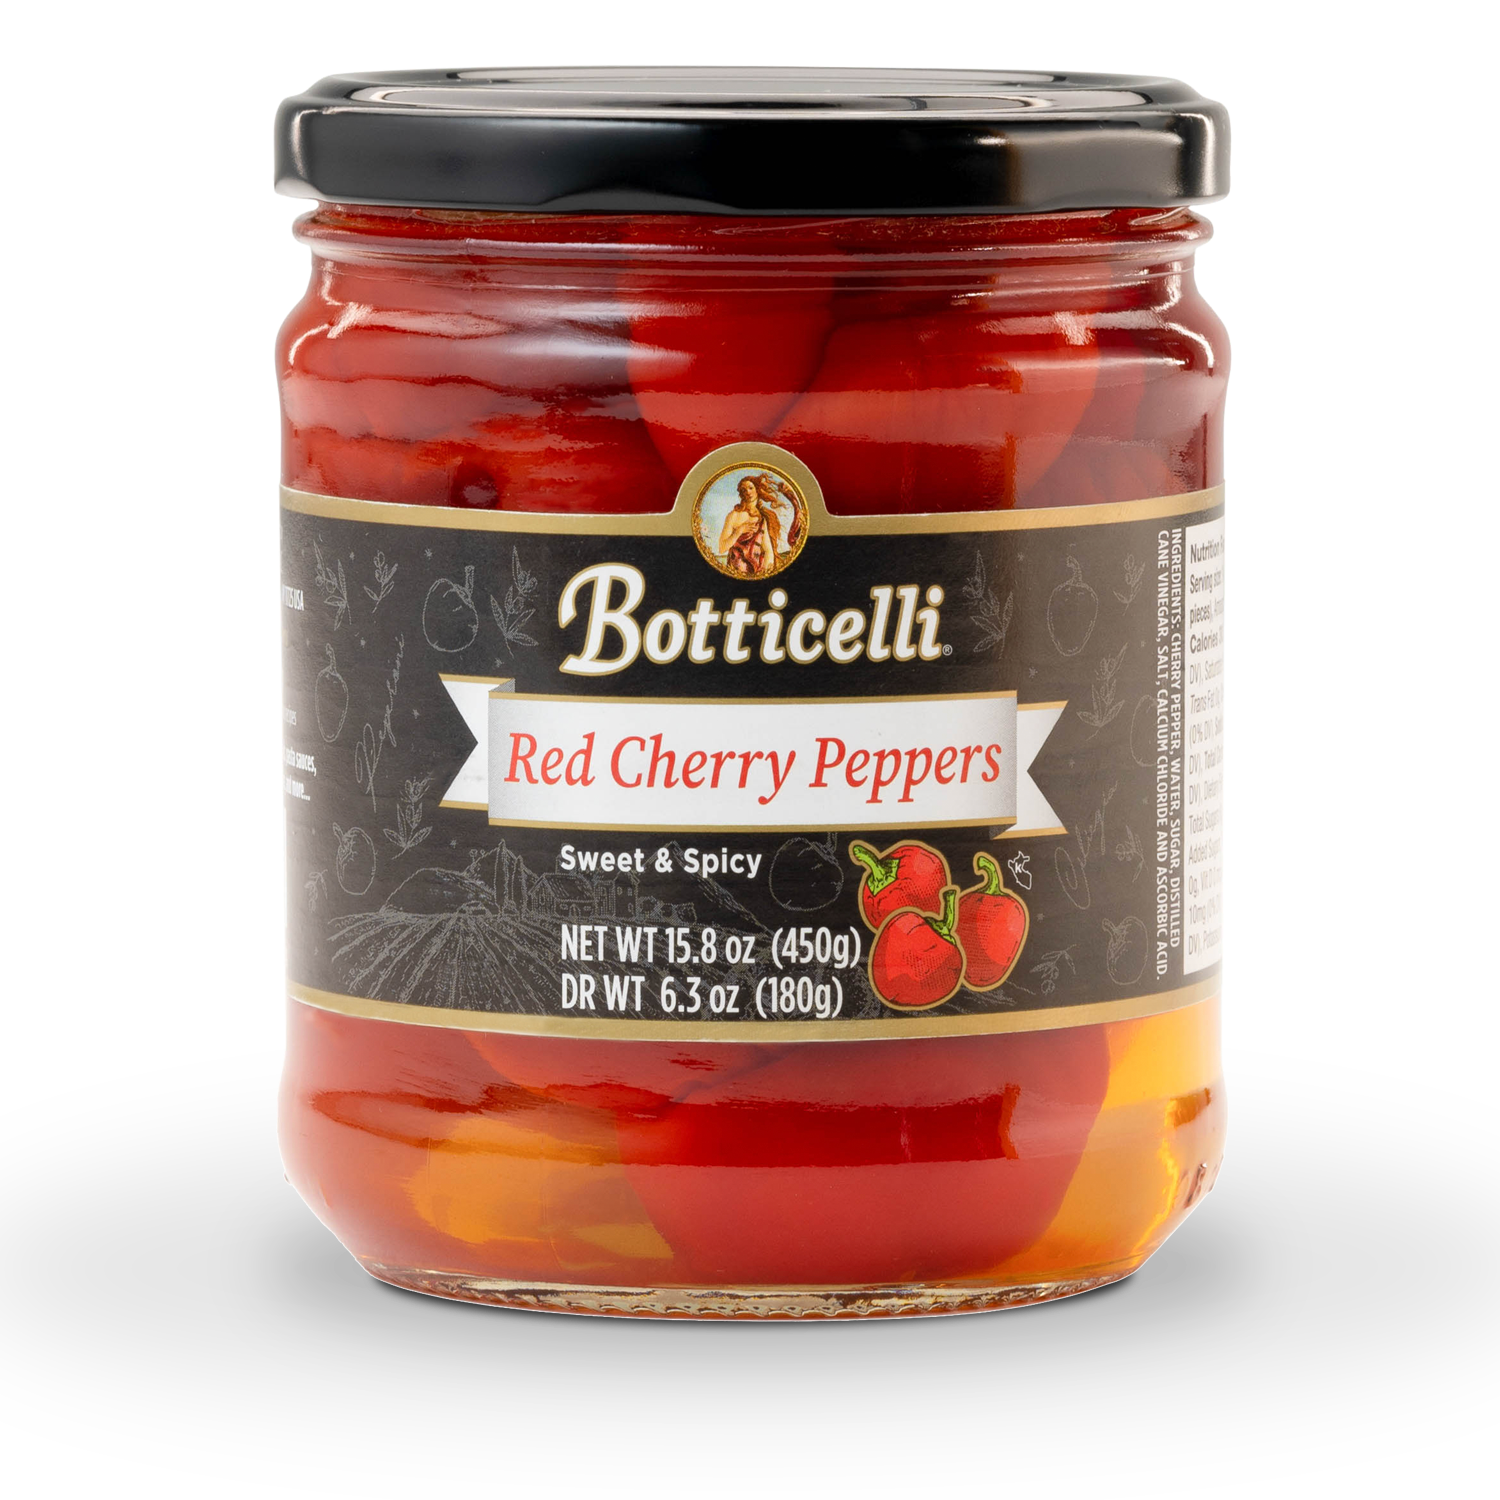 Sweet & Hot Cherry Peppers - 15.8oz